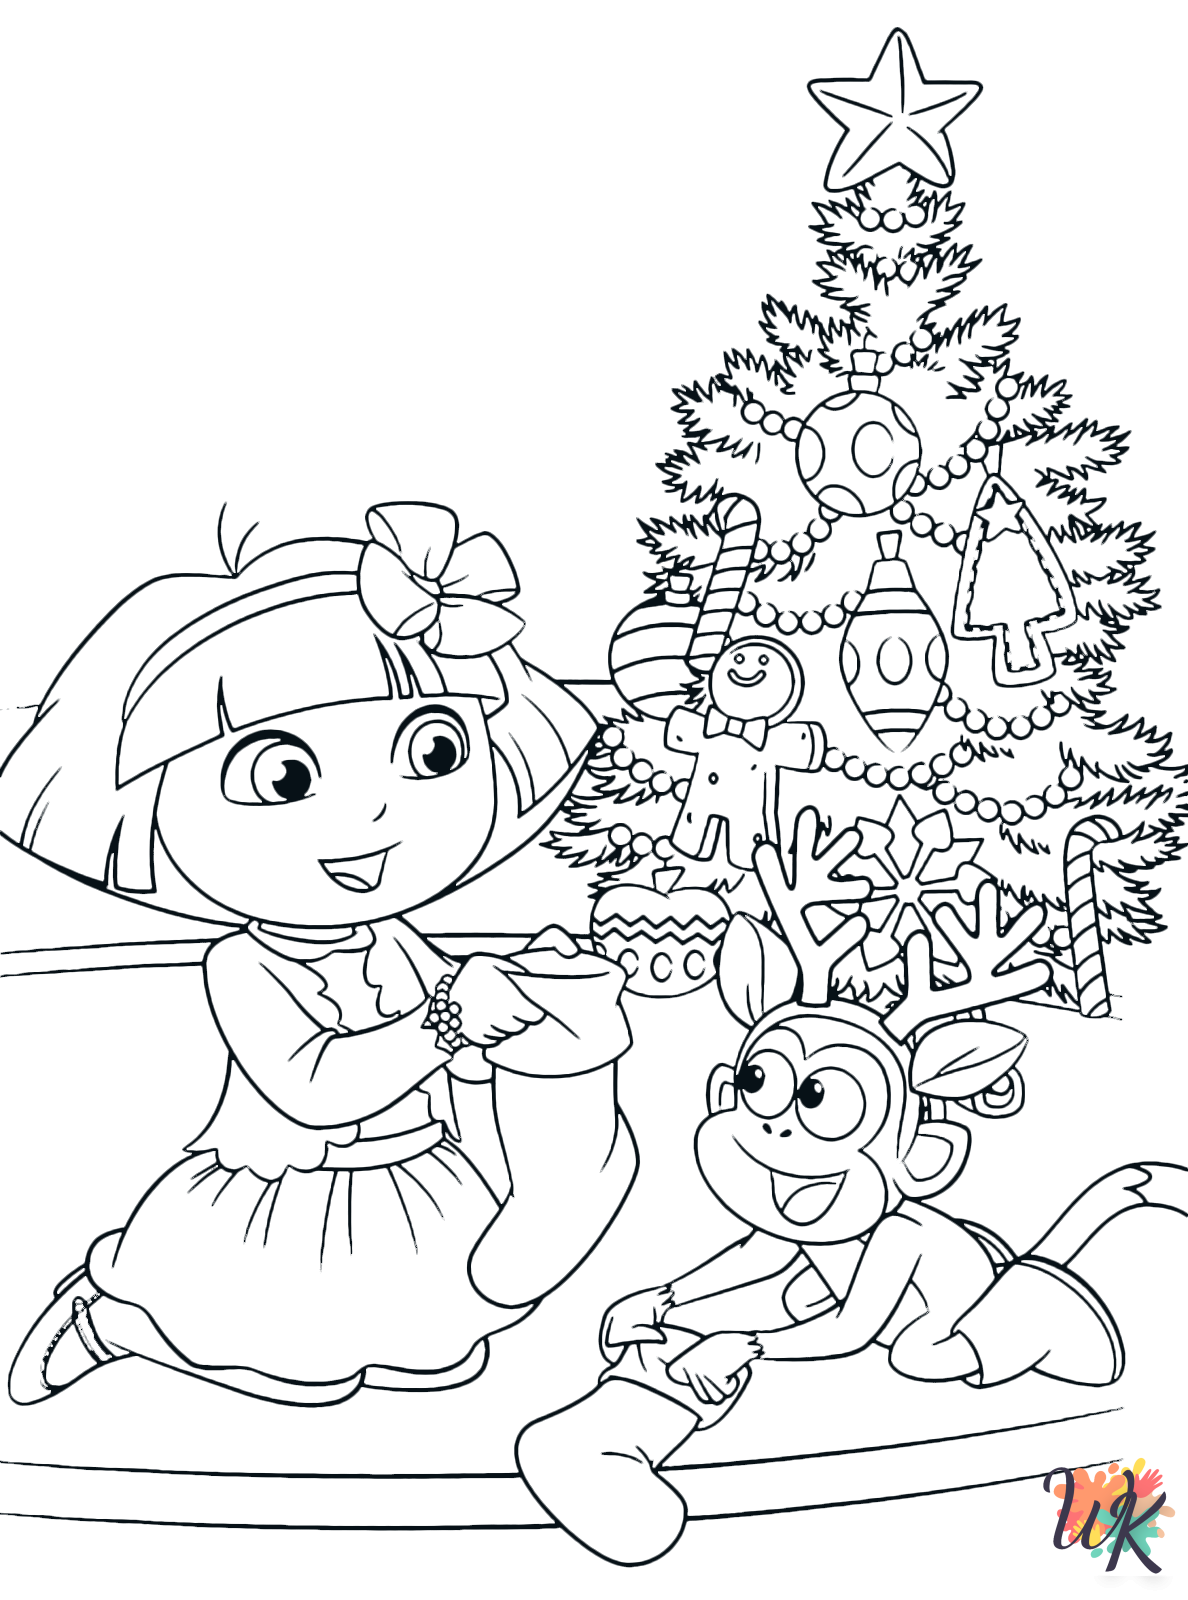 Dora Christmas ornaments coloring pages